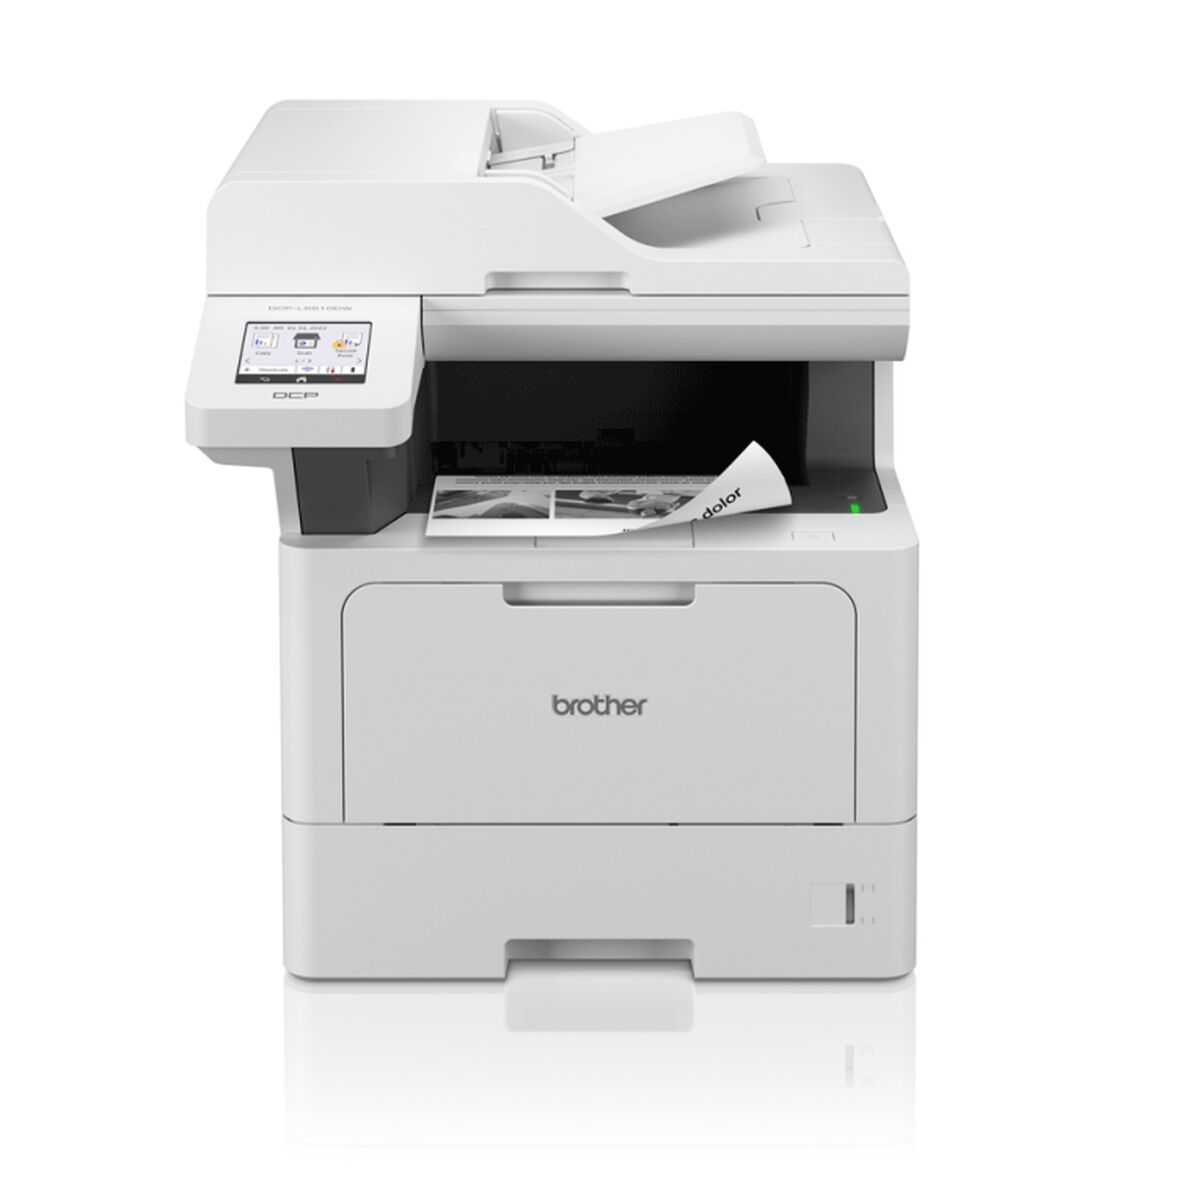 Multifunction Printer Brother DCPL5510DW, Brother, Computing, Printers and accessories, multifunction-printer-brother-dcpl5510dw, Brand_Brother, category-reference-2609, category-reference-2642, category-reference-2645, category-reference-t-19685, category-reference-t-19911, category-reference-t-21378, category-reference-t-25692, computers / peripherals, Condition_NEW, office, Price_400 - 500, Teleworking, RiotNook